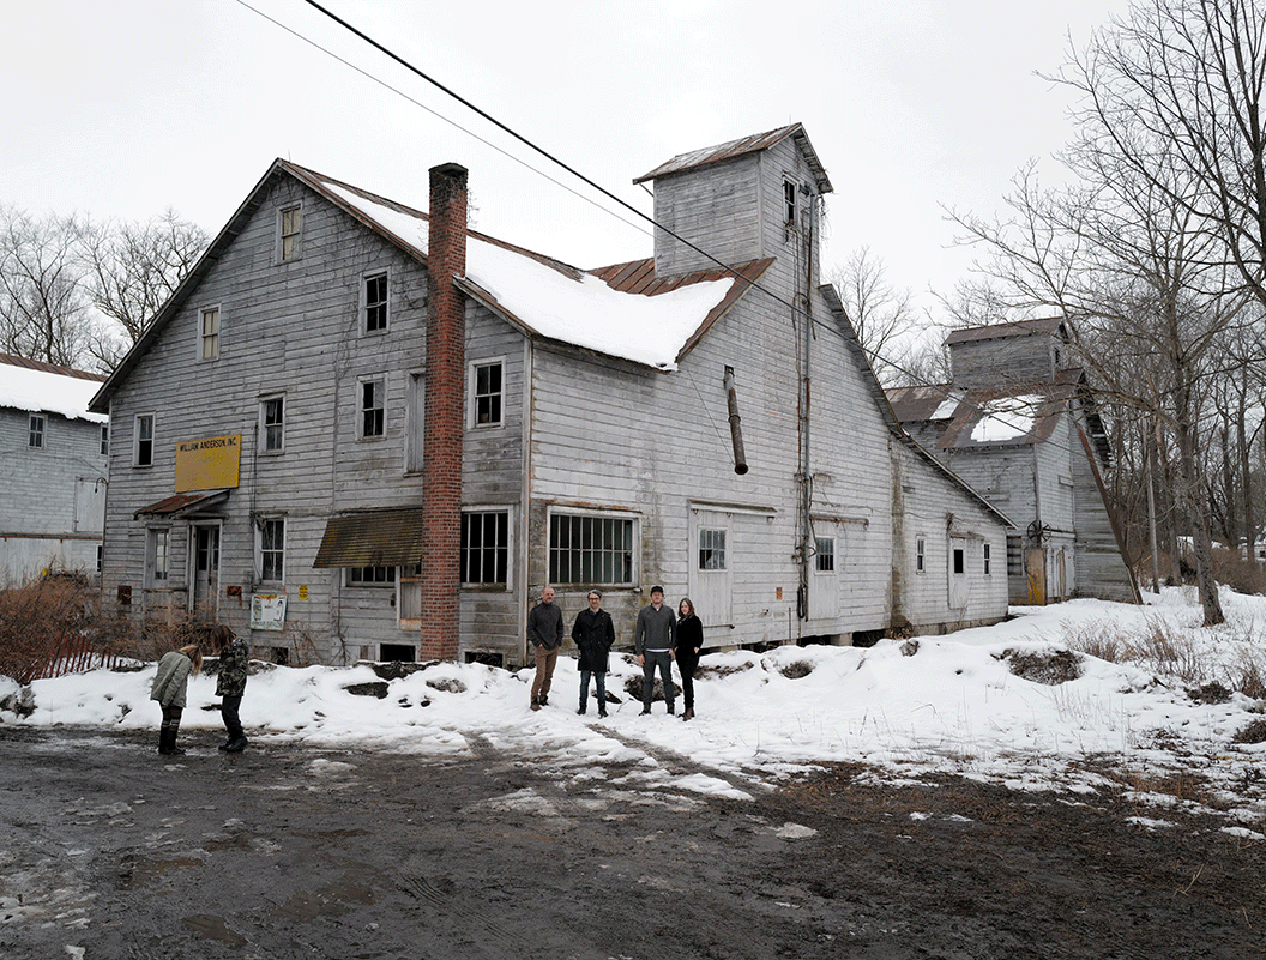 Exterior winter view of the Anderson feed mill complex in Accord, New York. Snow dusts the ground during a site visit by The Oberon Group.